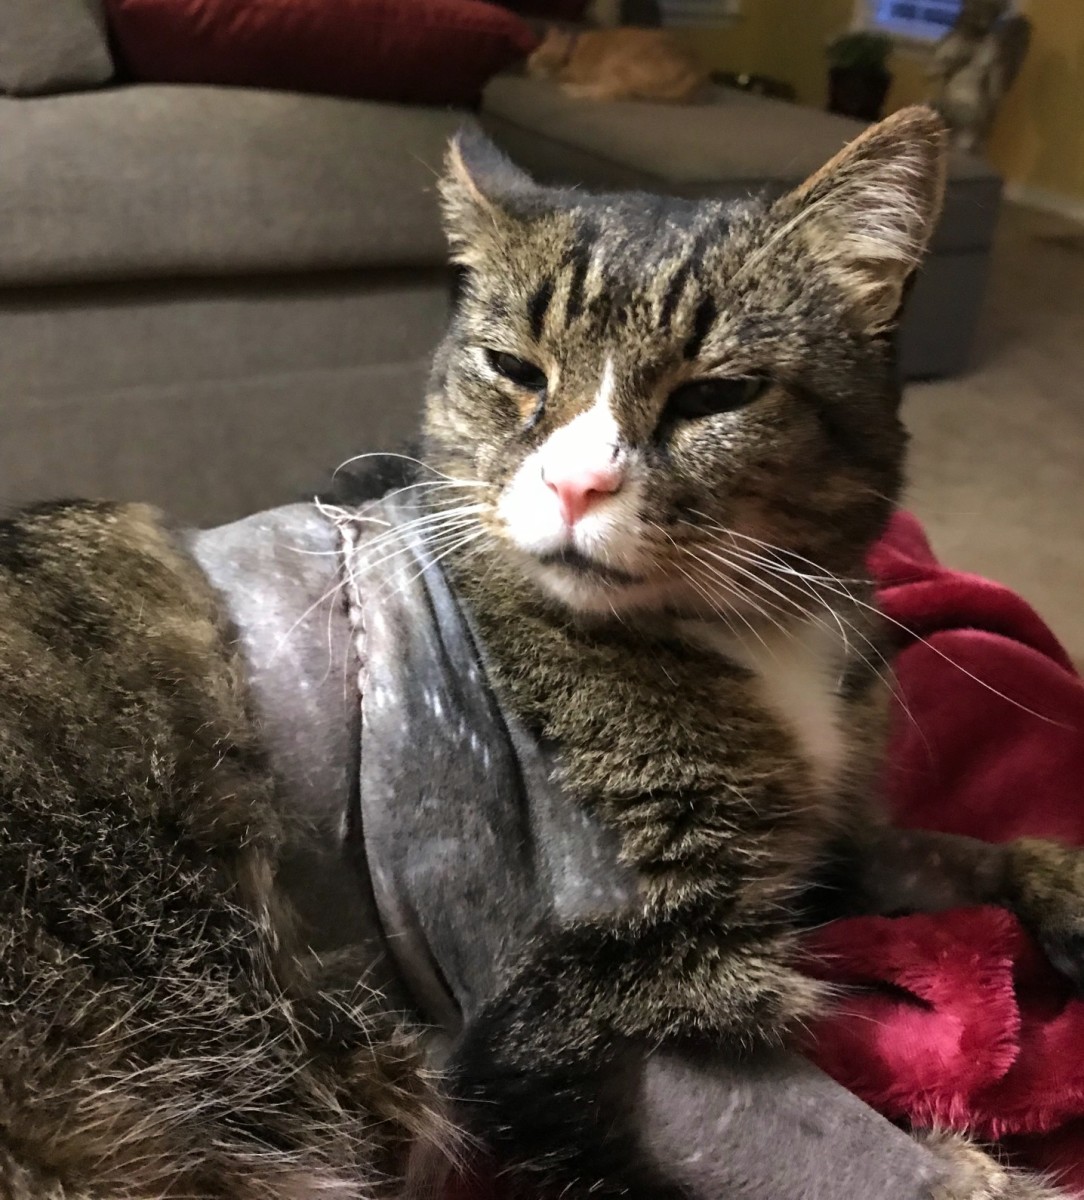 My brave cat, Gunter, battled sarcoma. He had multiple large tumors removed before ultimately passing away from cancer. We kissed his healed scars and told him how loved he was. (That's his resting grumpy look.)